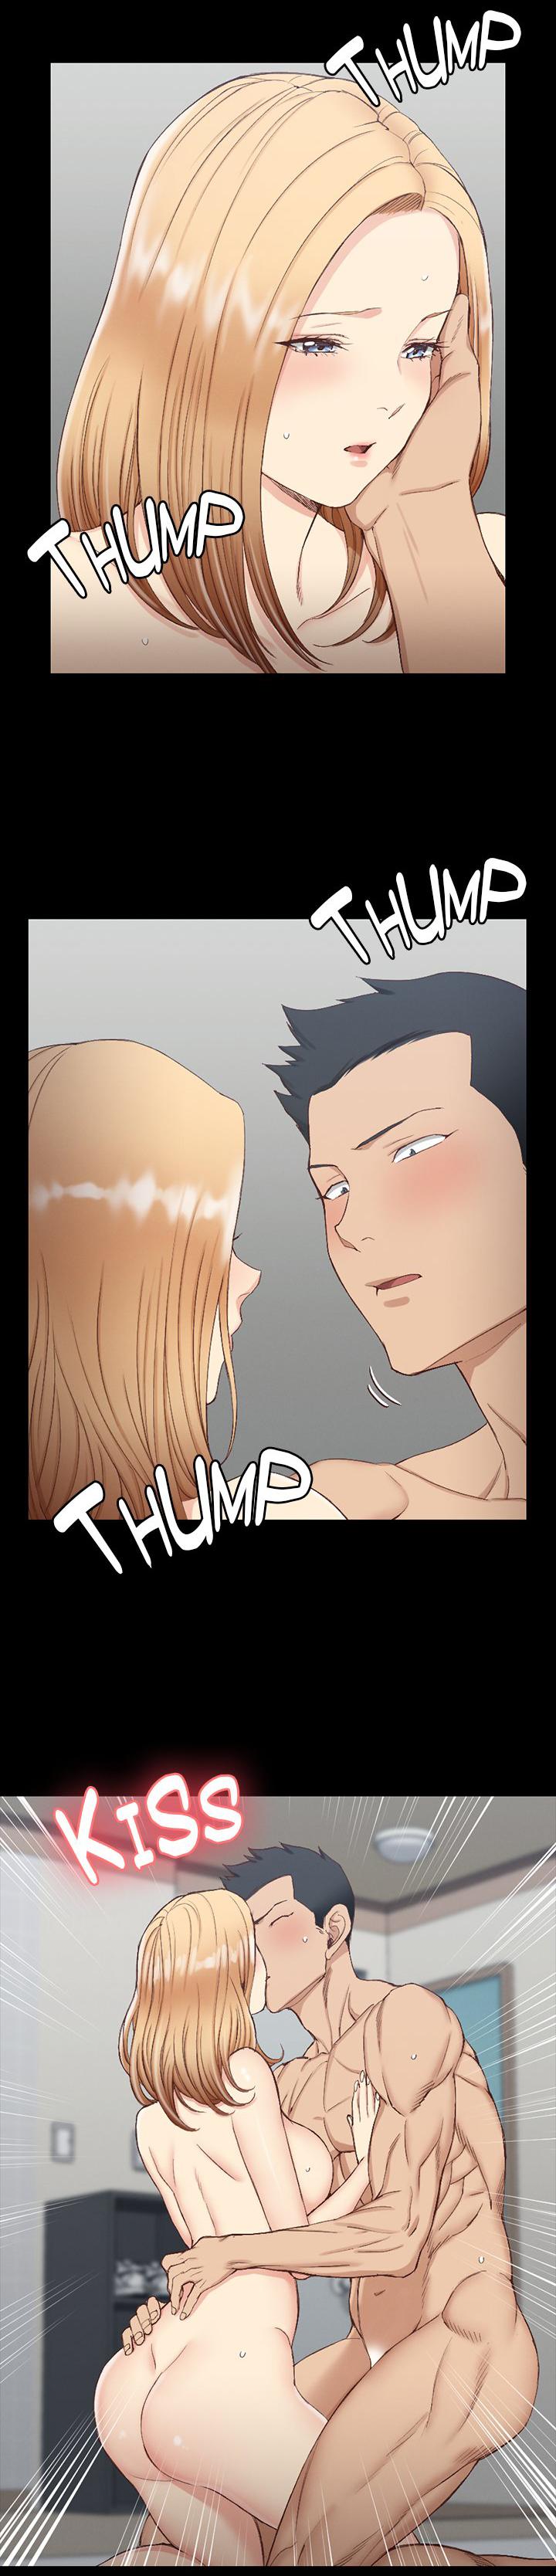 Hole That Man's Room/His Place Ch. 121-122 Cheating Wife - Page 2